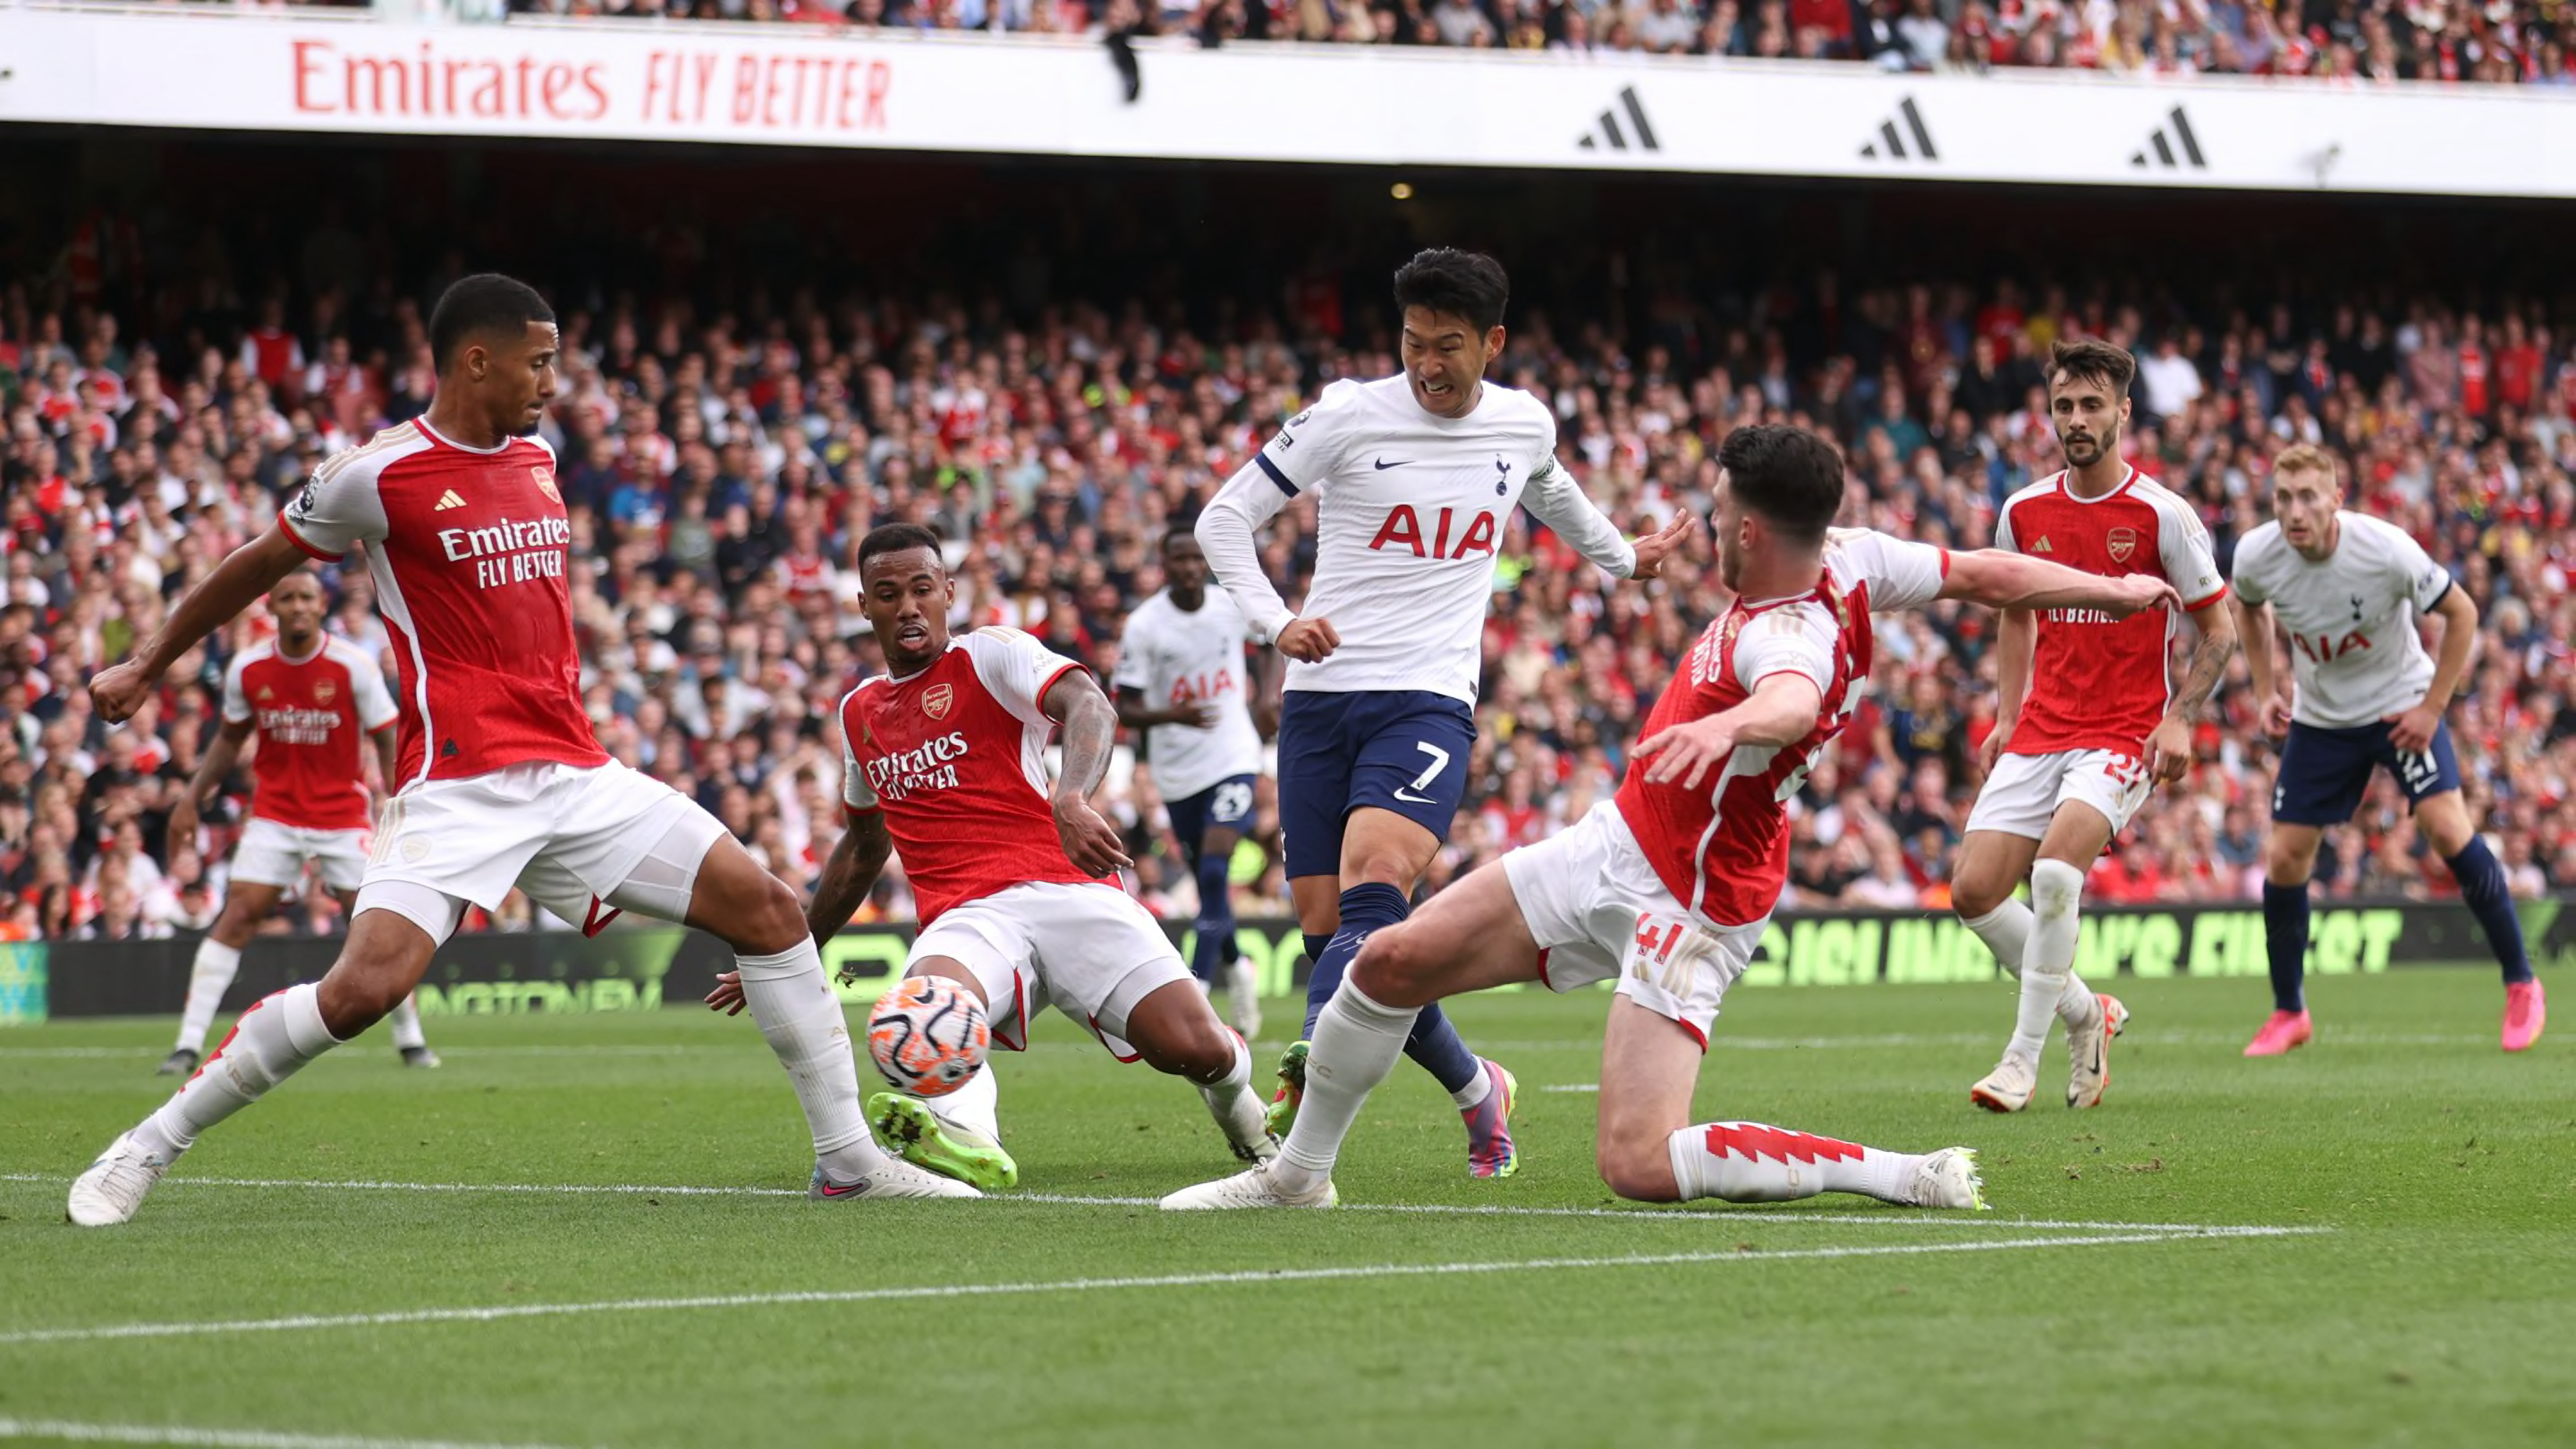 Winners & losers from Arsenal 2-2 Tottenham in the north London derby